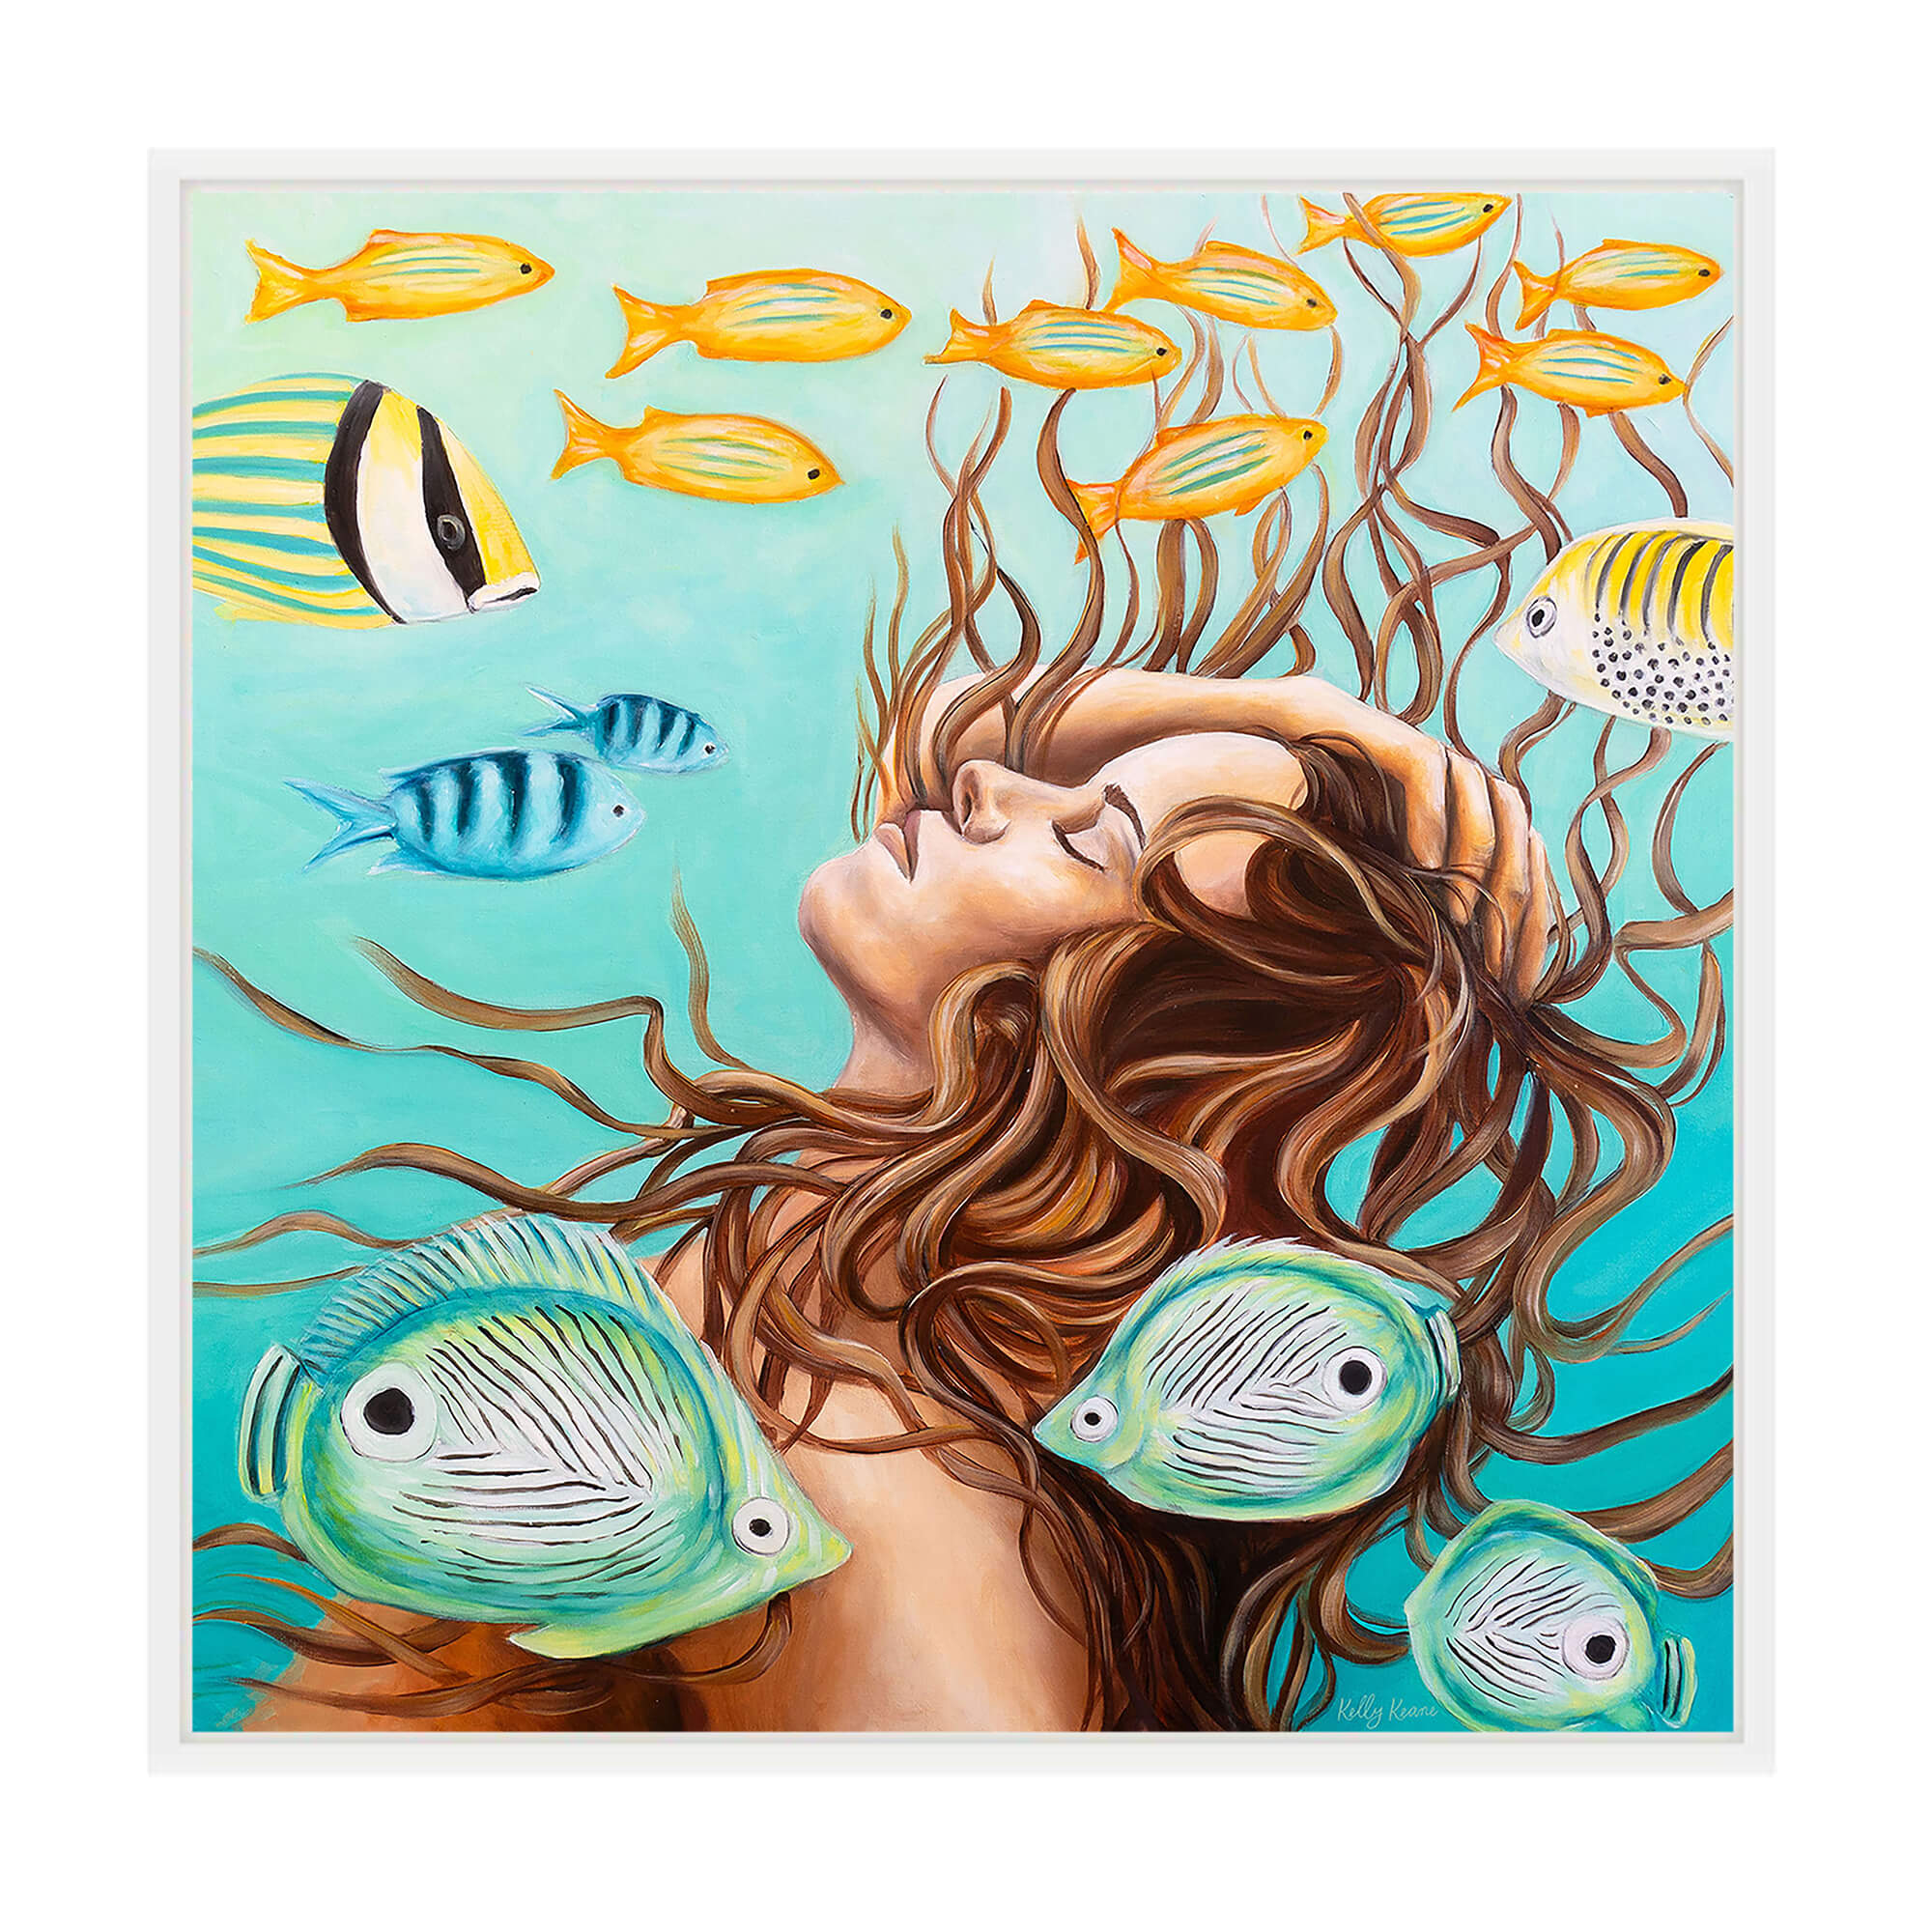 Canvas art print of a woman with some colorful fish around by Hawaii artist Kelly Keane 